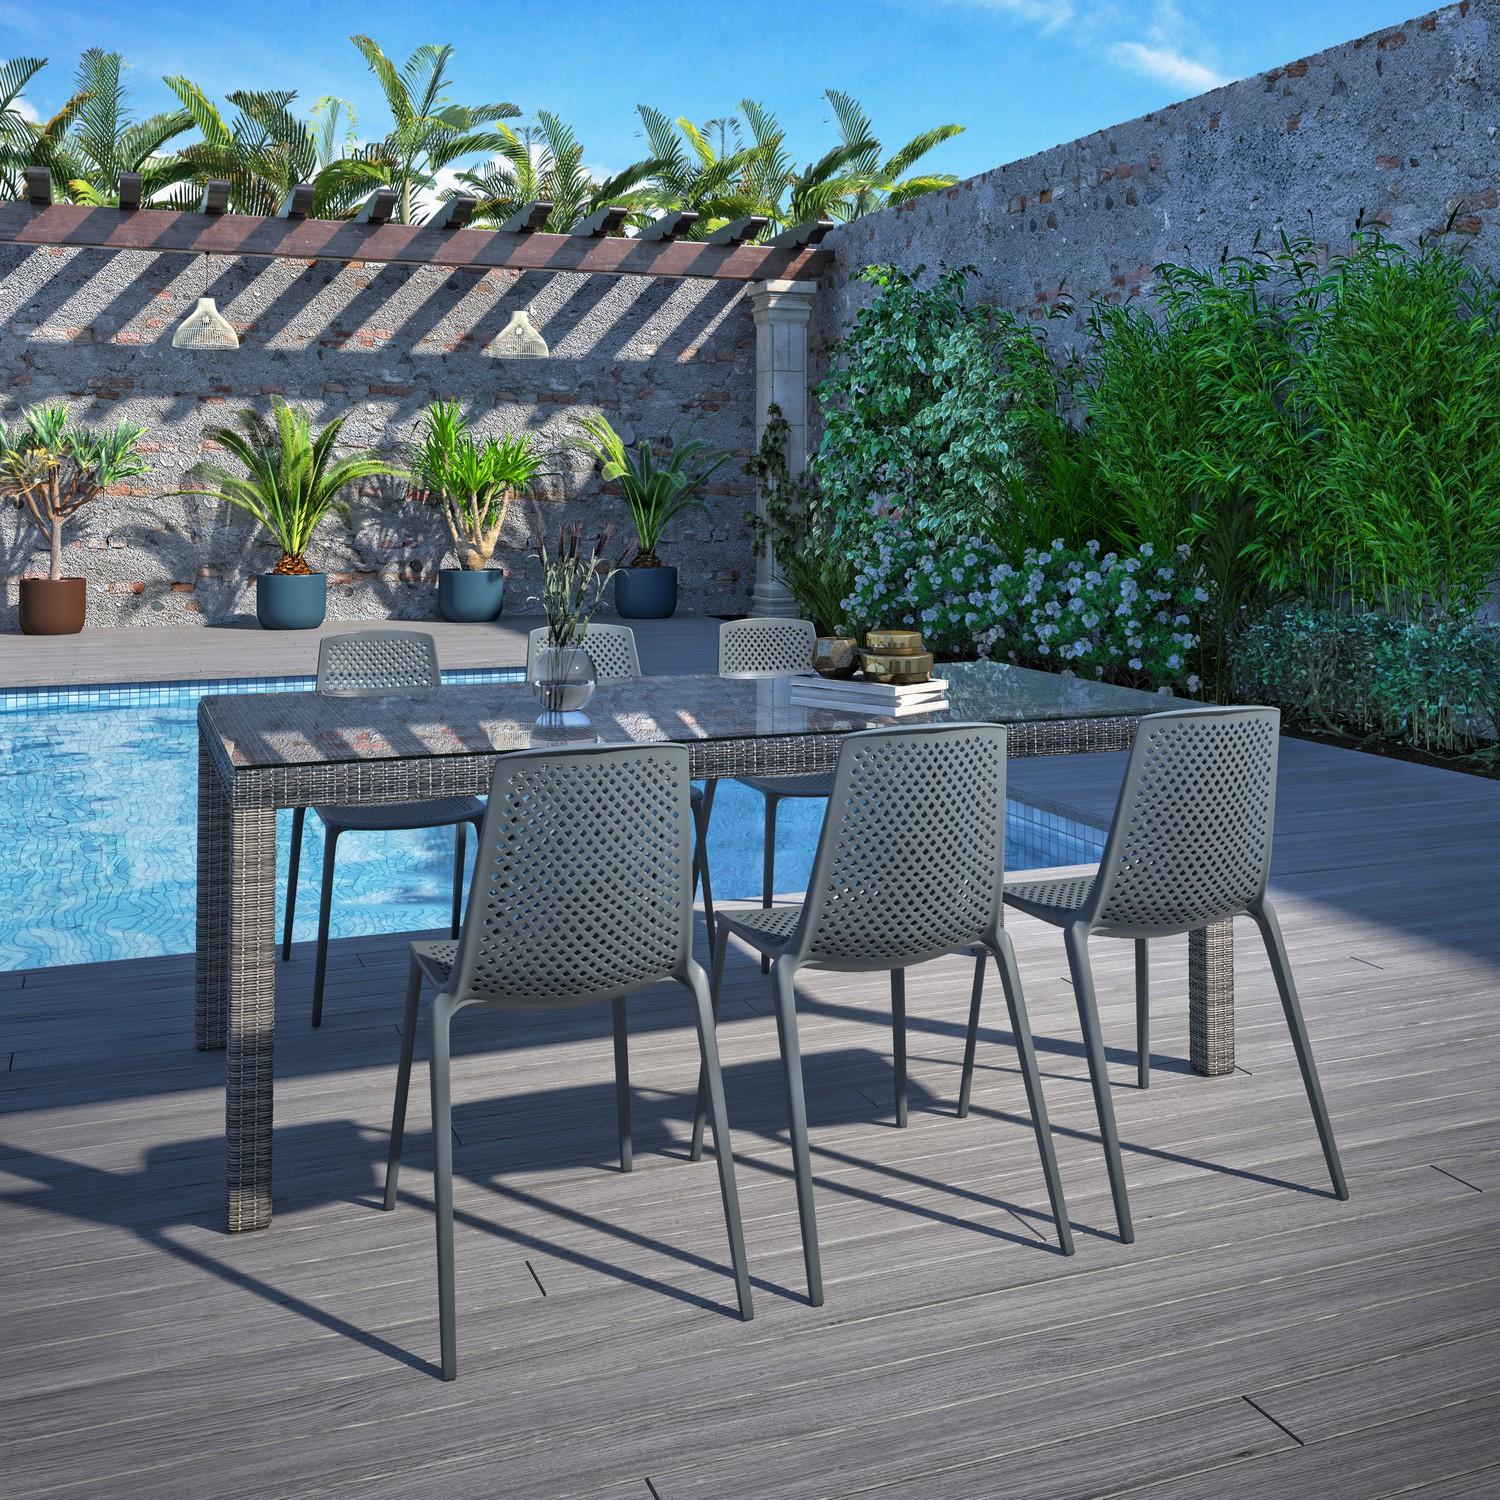 BRAND NEW OUTDOOR SYNTHETIC WICKER TABLE 83" x 43" WITH GLASS TOP + 6 RESIN STACKING CHAIRS GREY - O